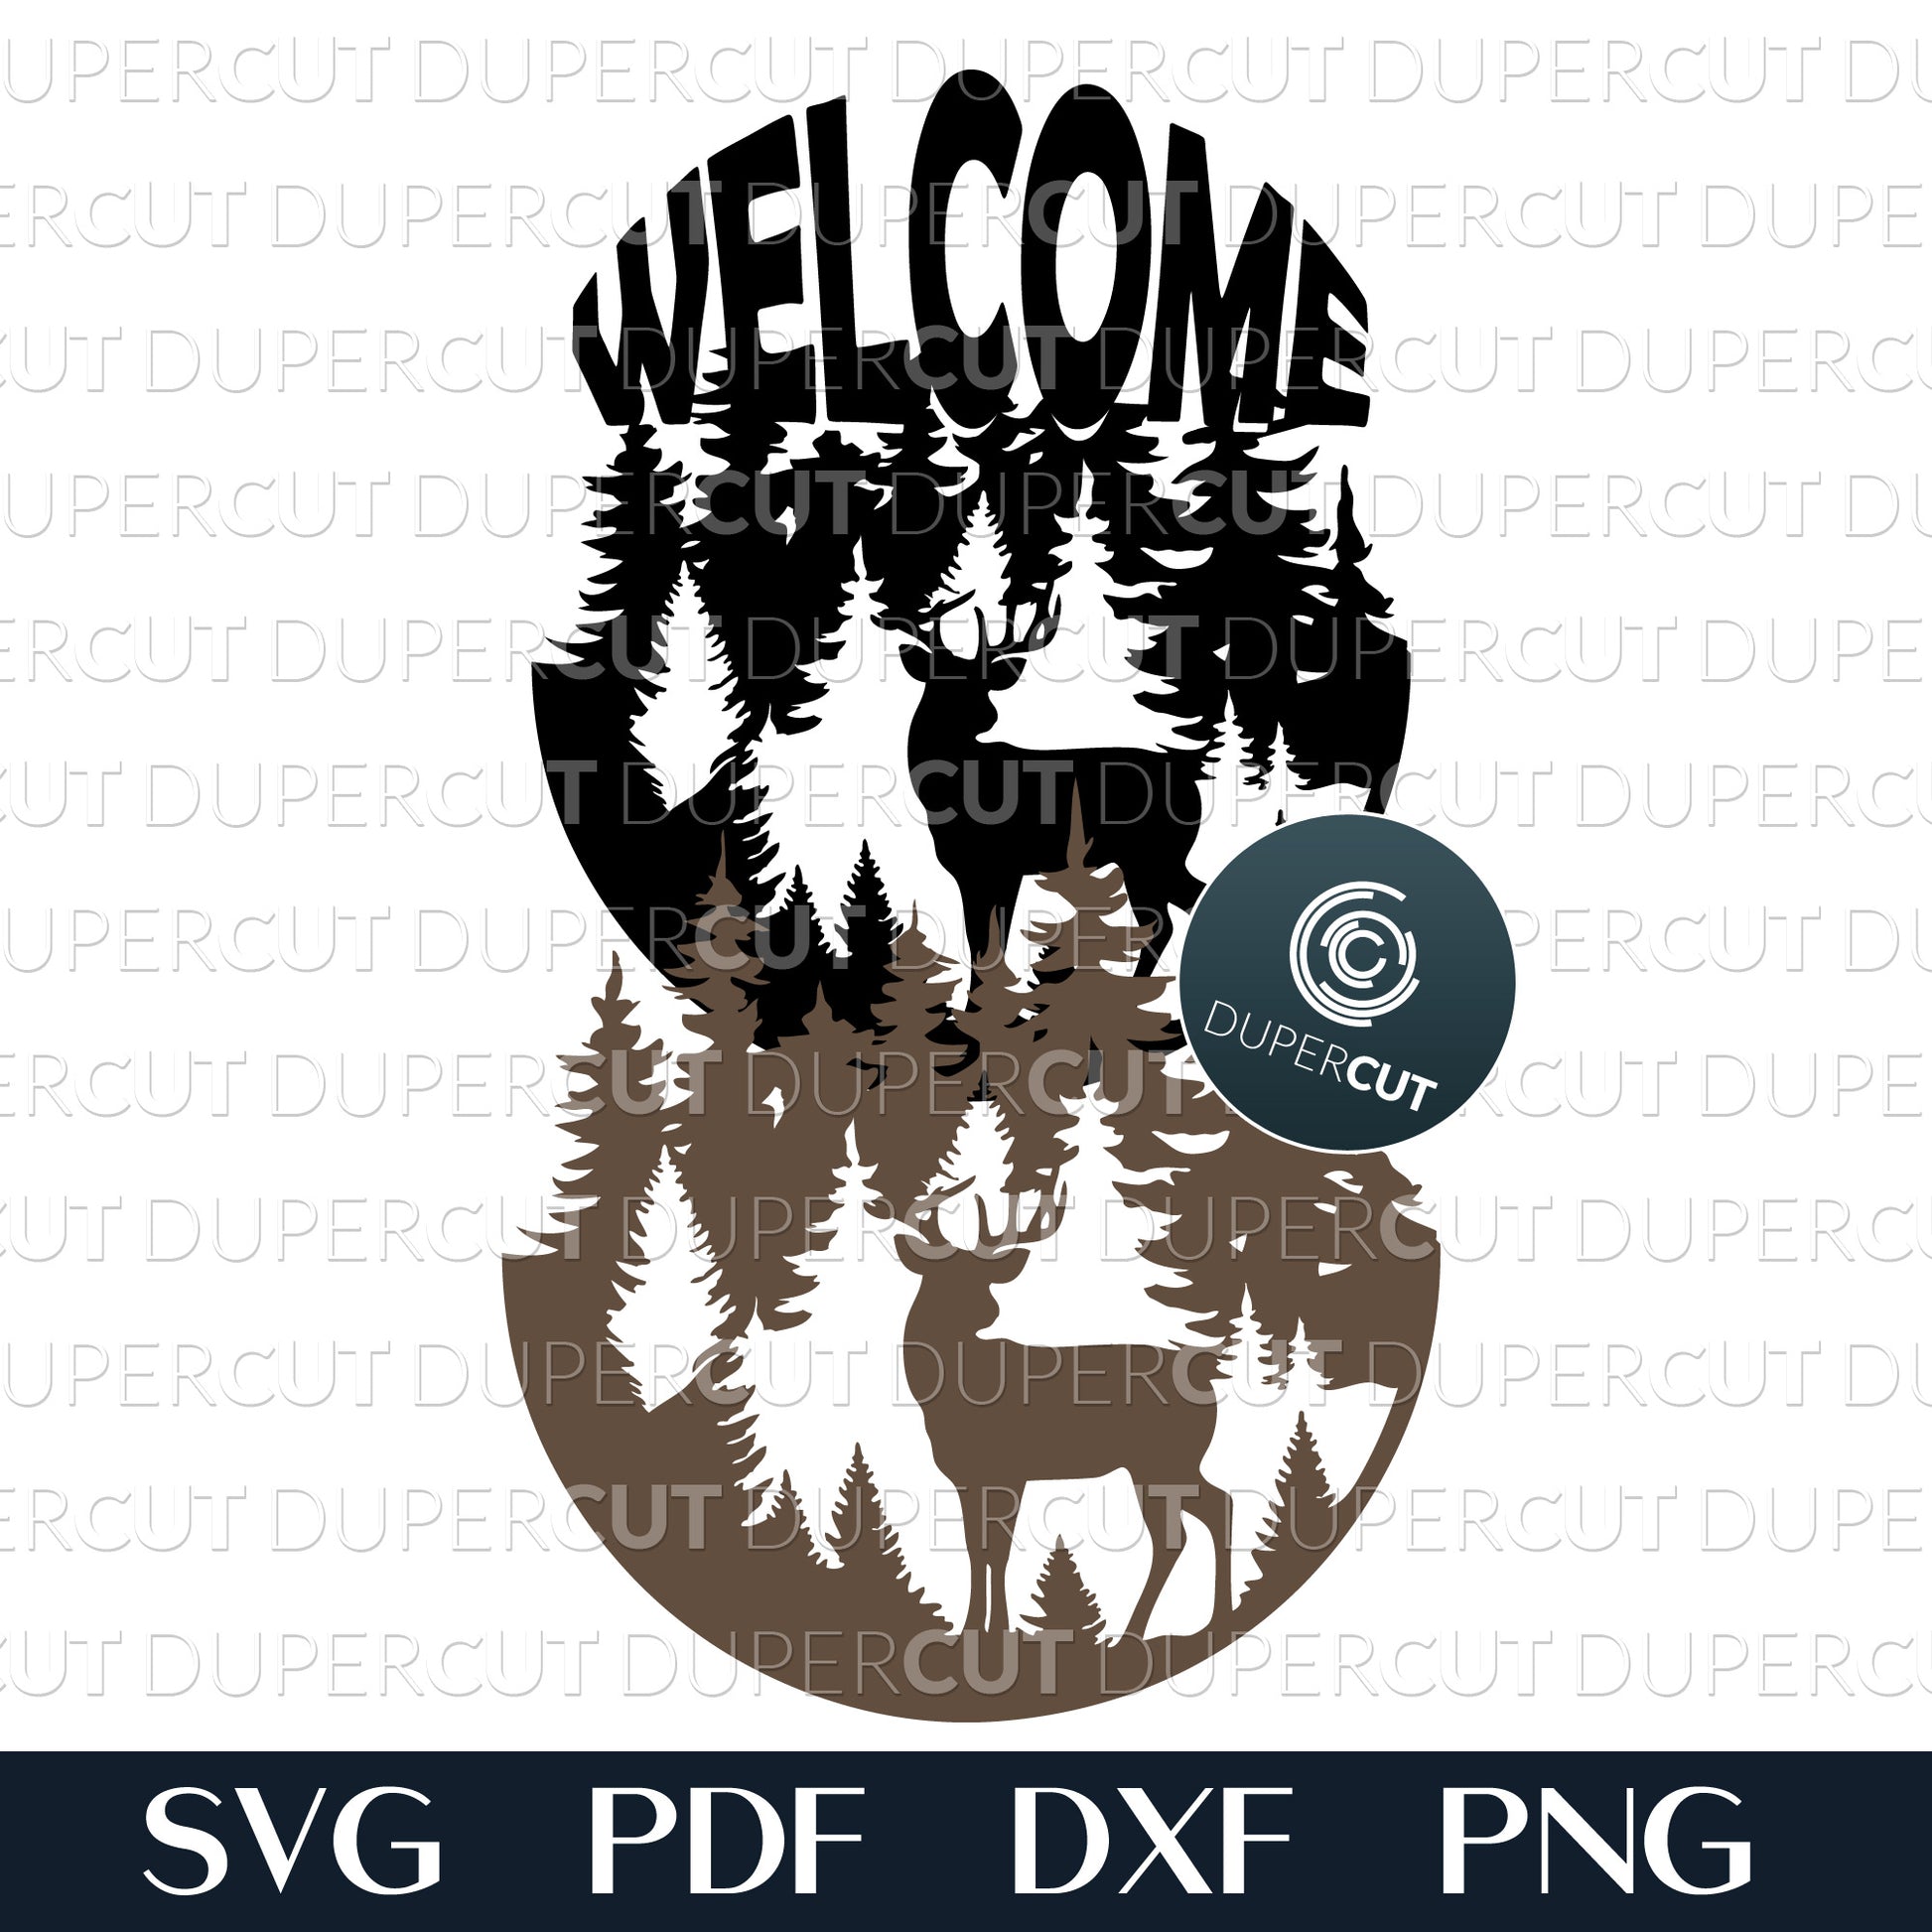 Wilderness scene deer forest. Dual layer files. SVG PDF DXF cutting template for laser cutting, engraving, Glowforge, Cricut, Silhouette, CNC plasma